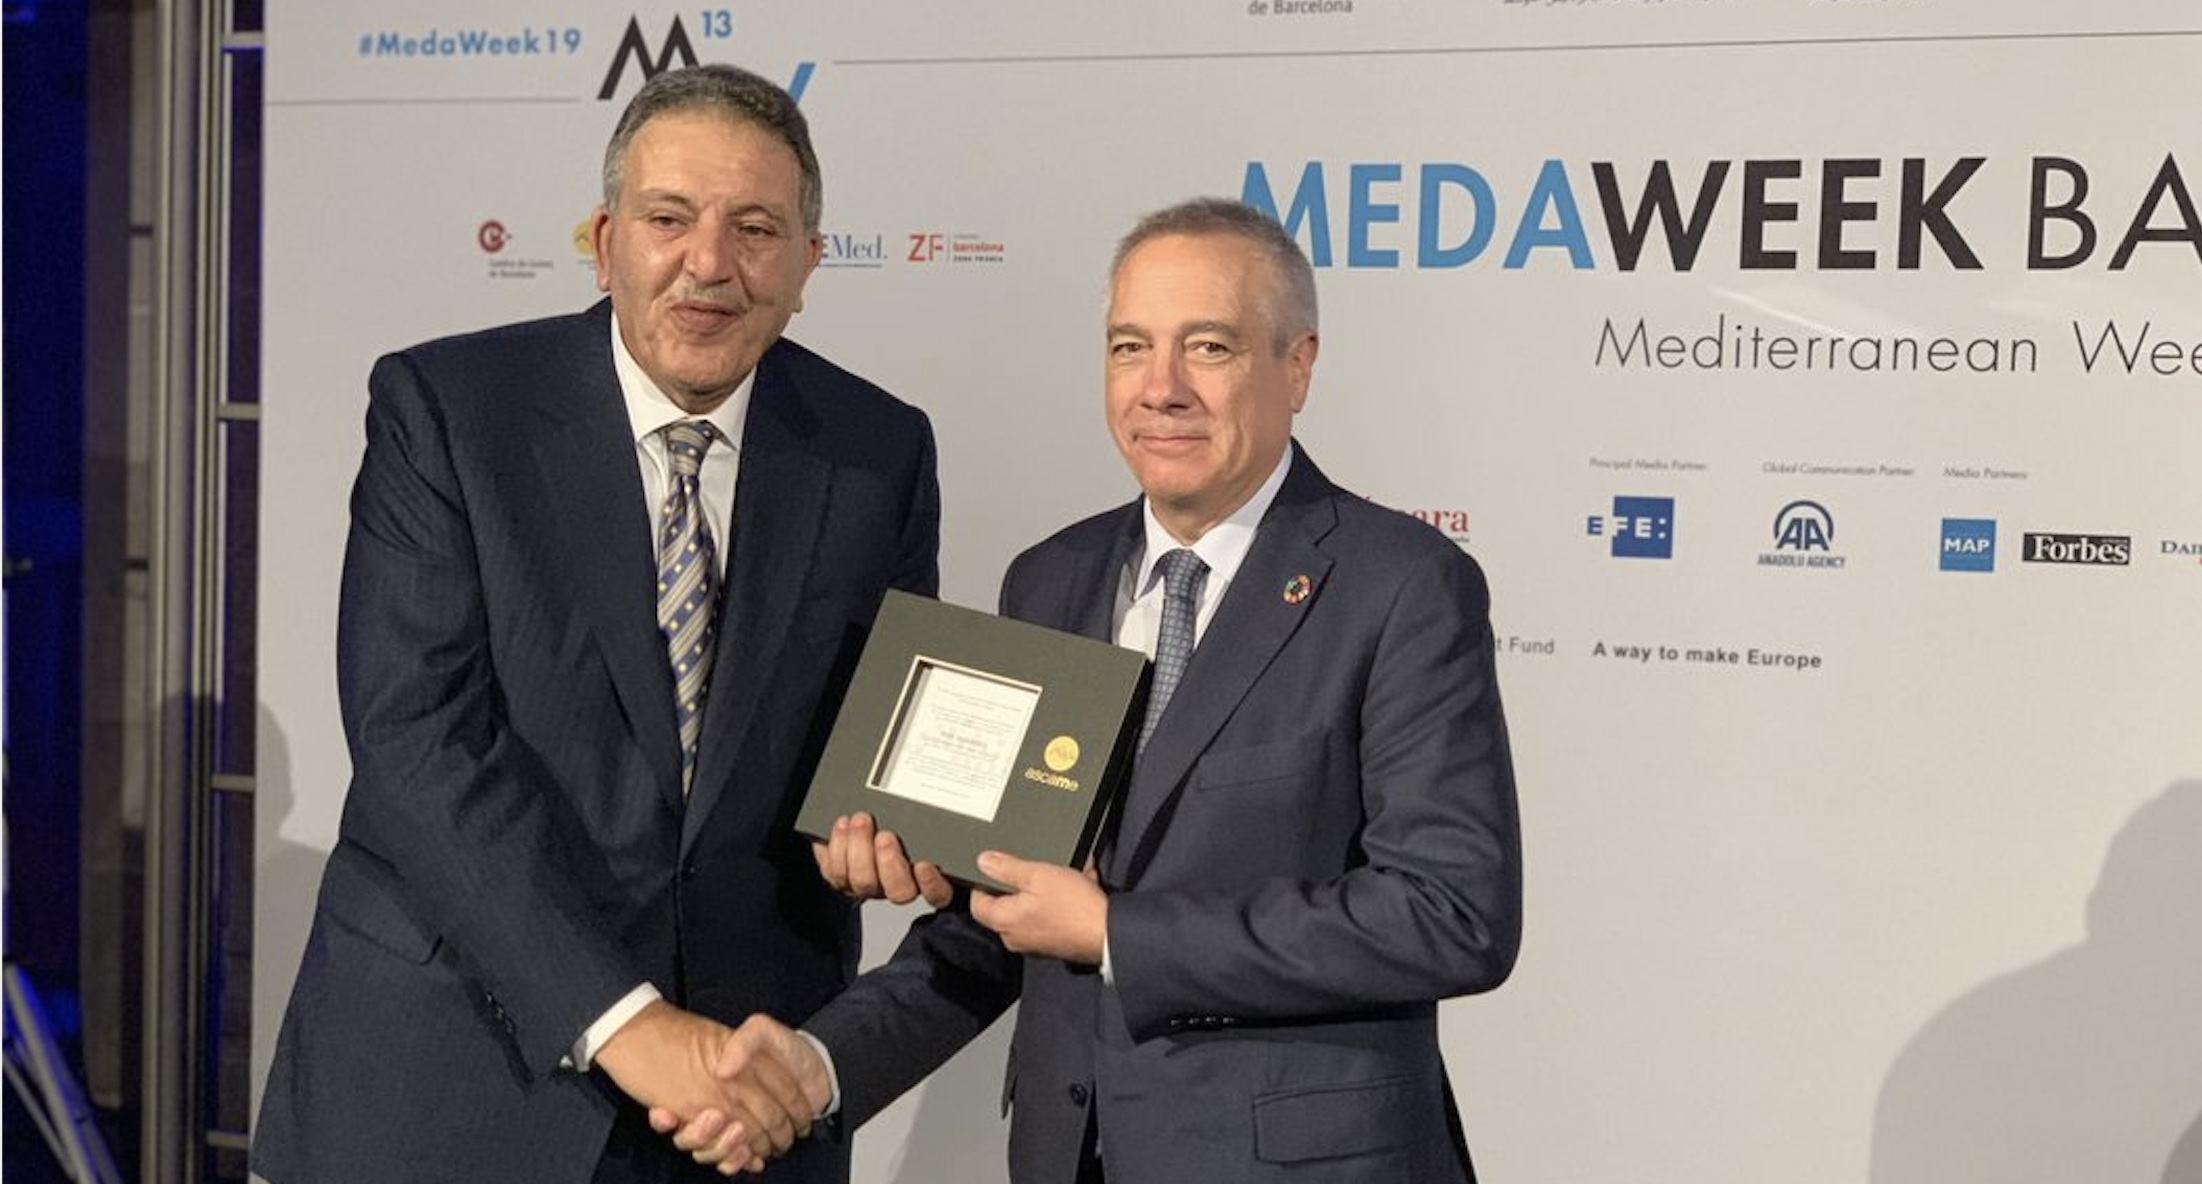 The MedaWeek 2019 distinguished the Barcelona Free Zone Consortium with the Mediterranean Award